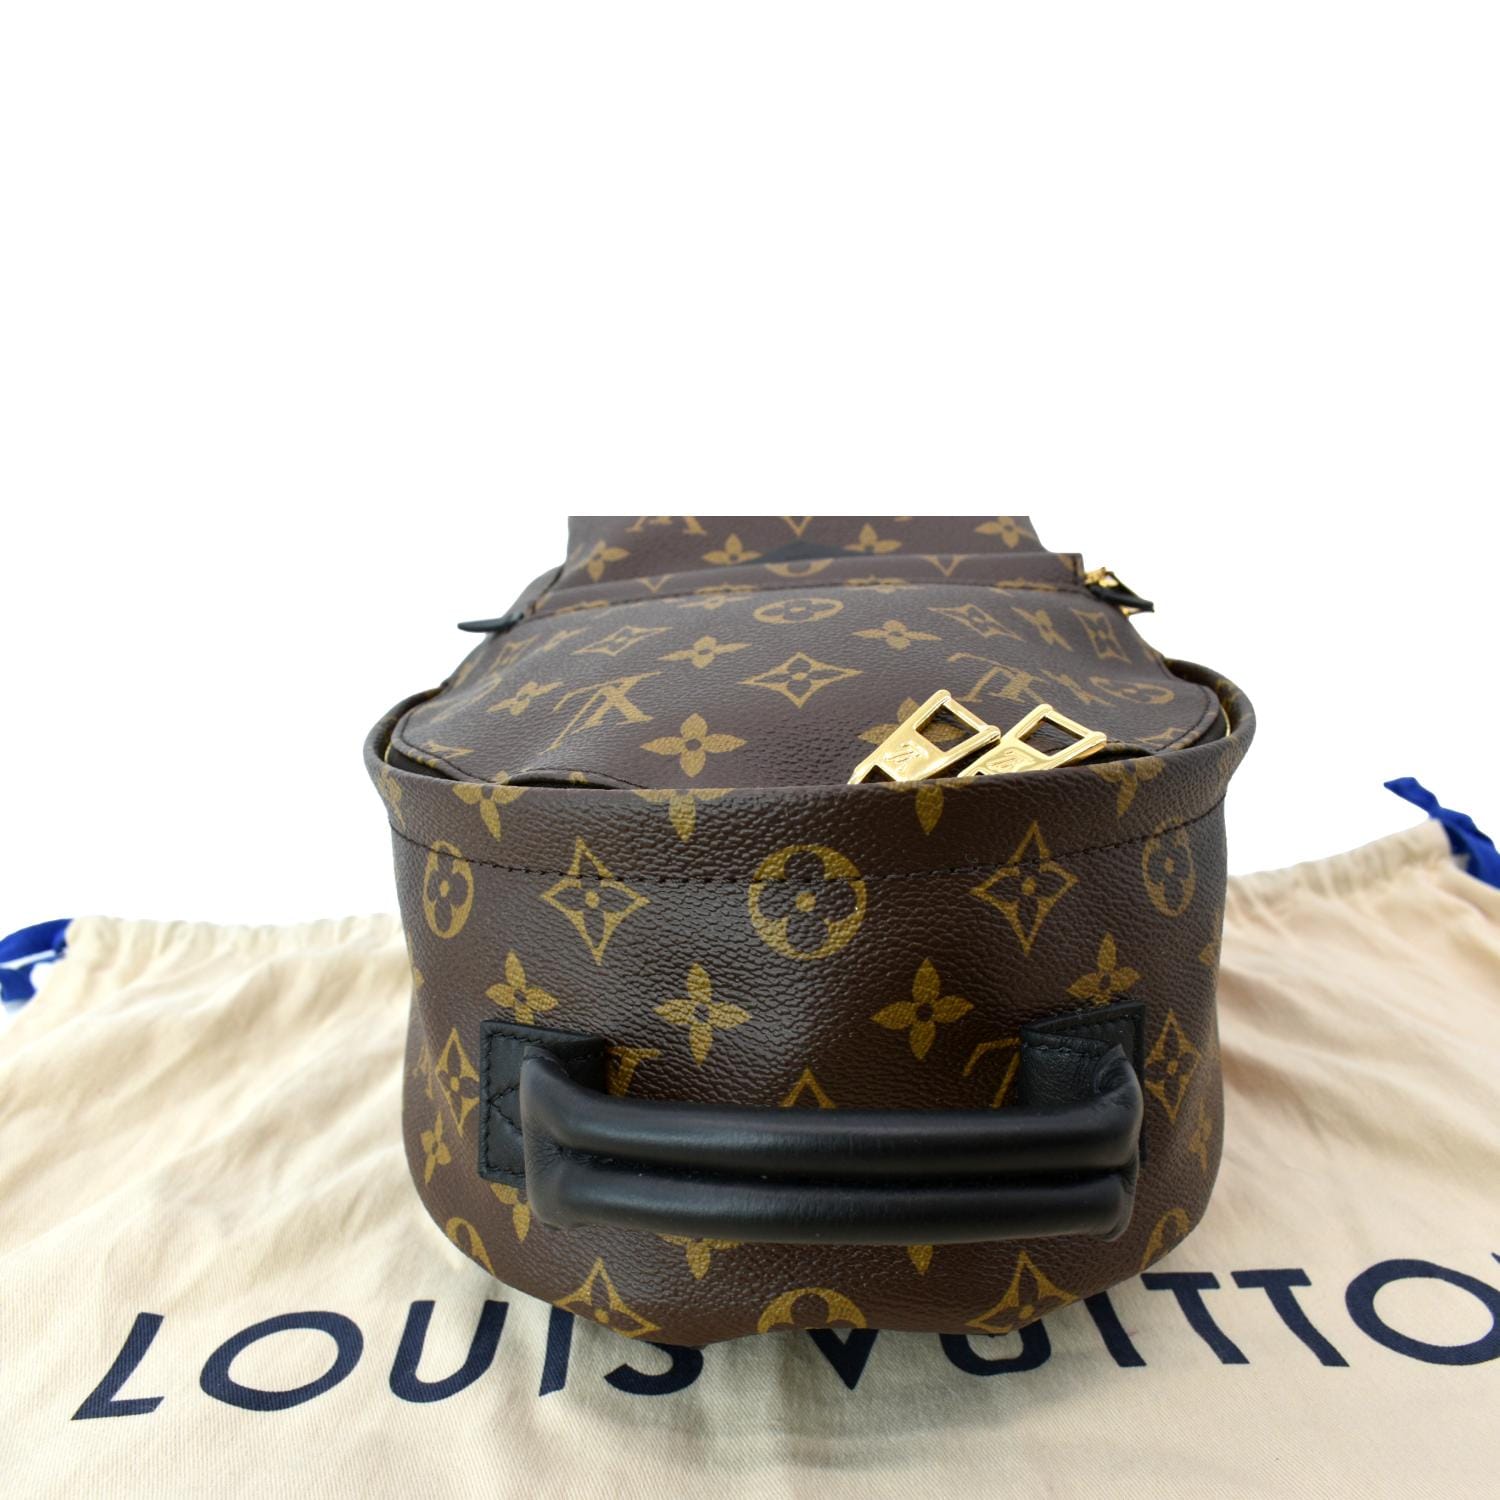 Palm springs cloth backpack Louis Vuitton Brown in Cloth - 27153719